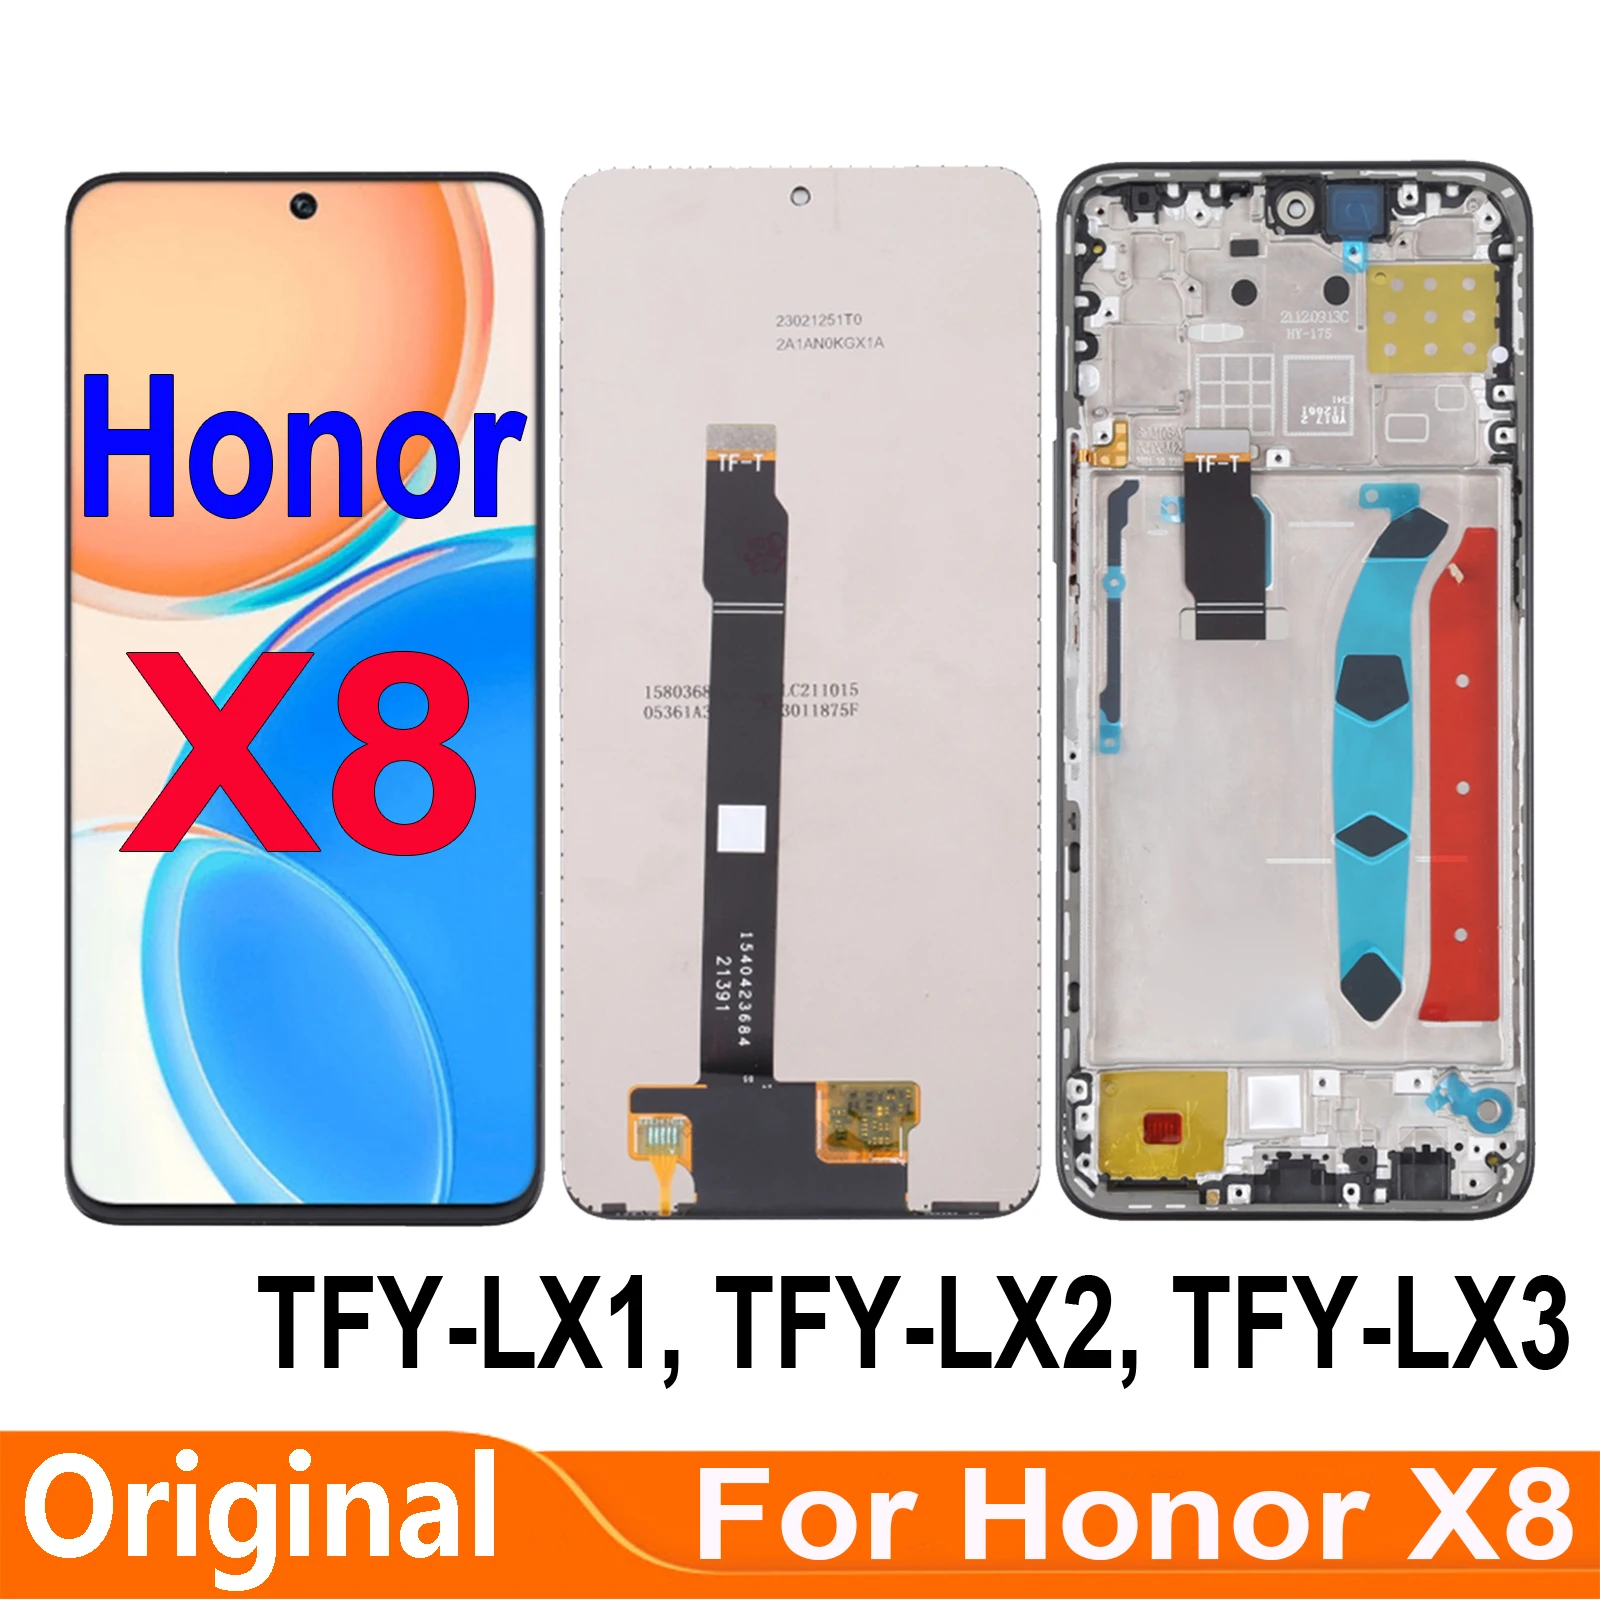 For Huawei Honor X8 5G VNE-N41 TFY-LX1 TFY-LX2 TFY-LX3 LCD Display Touch Screen Digitizer Assembly